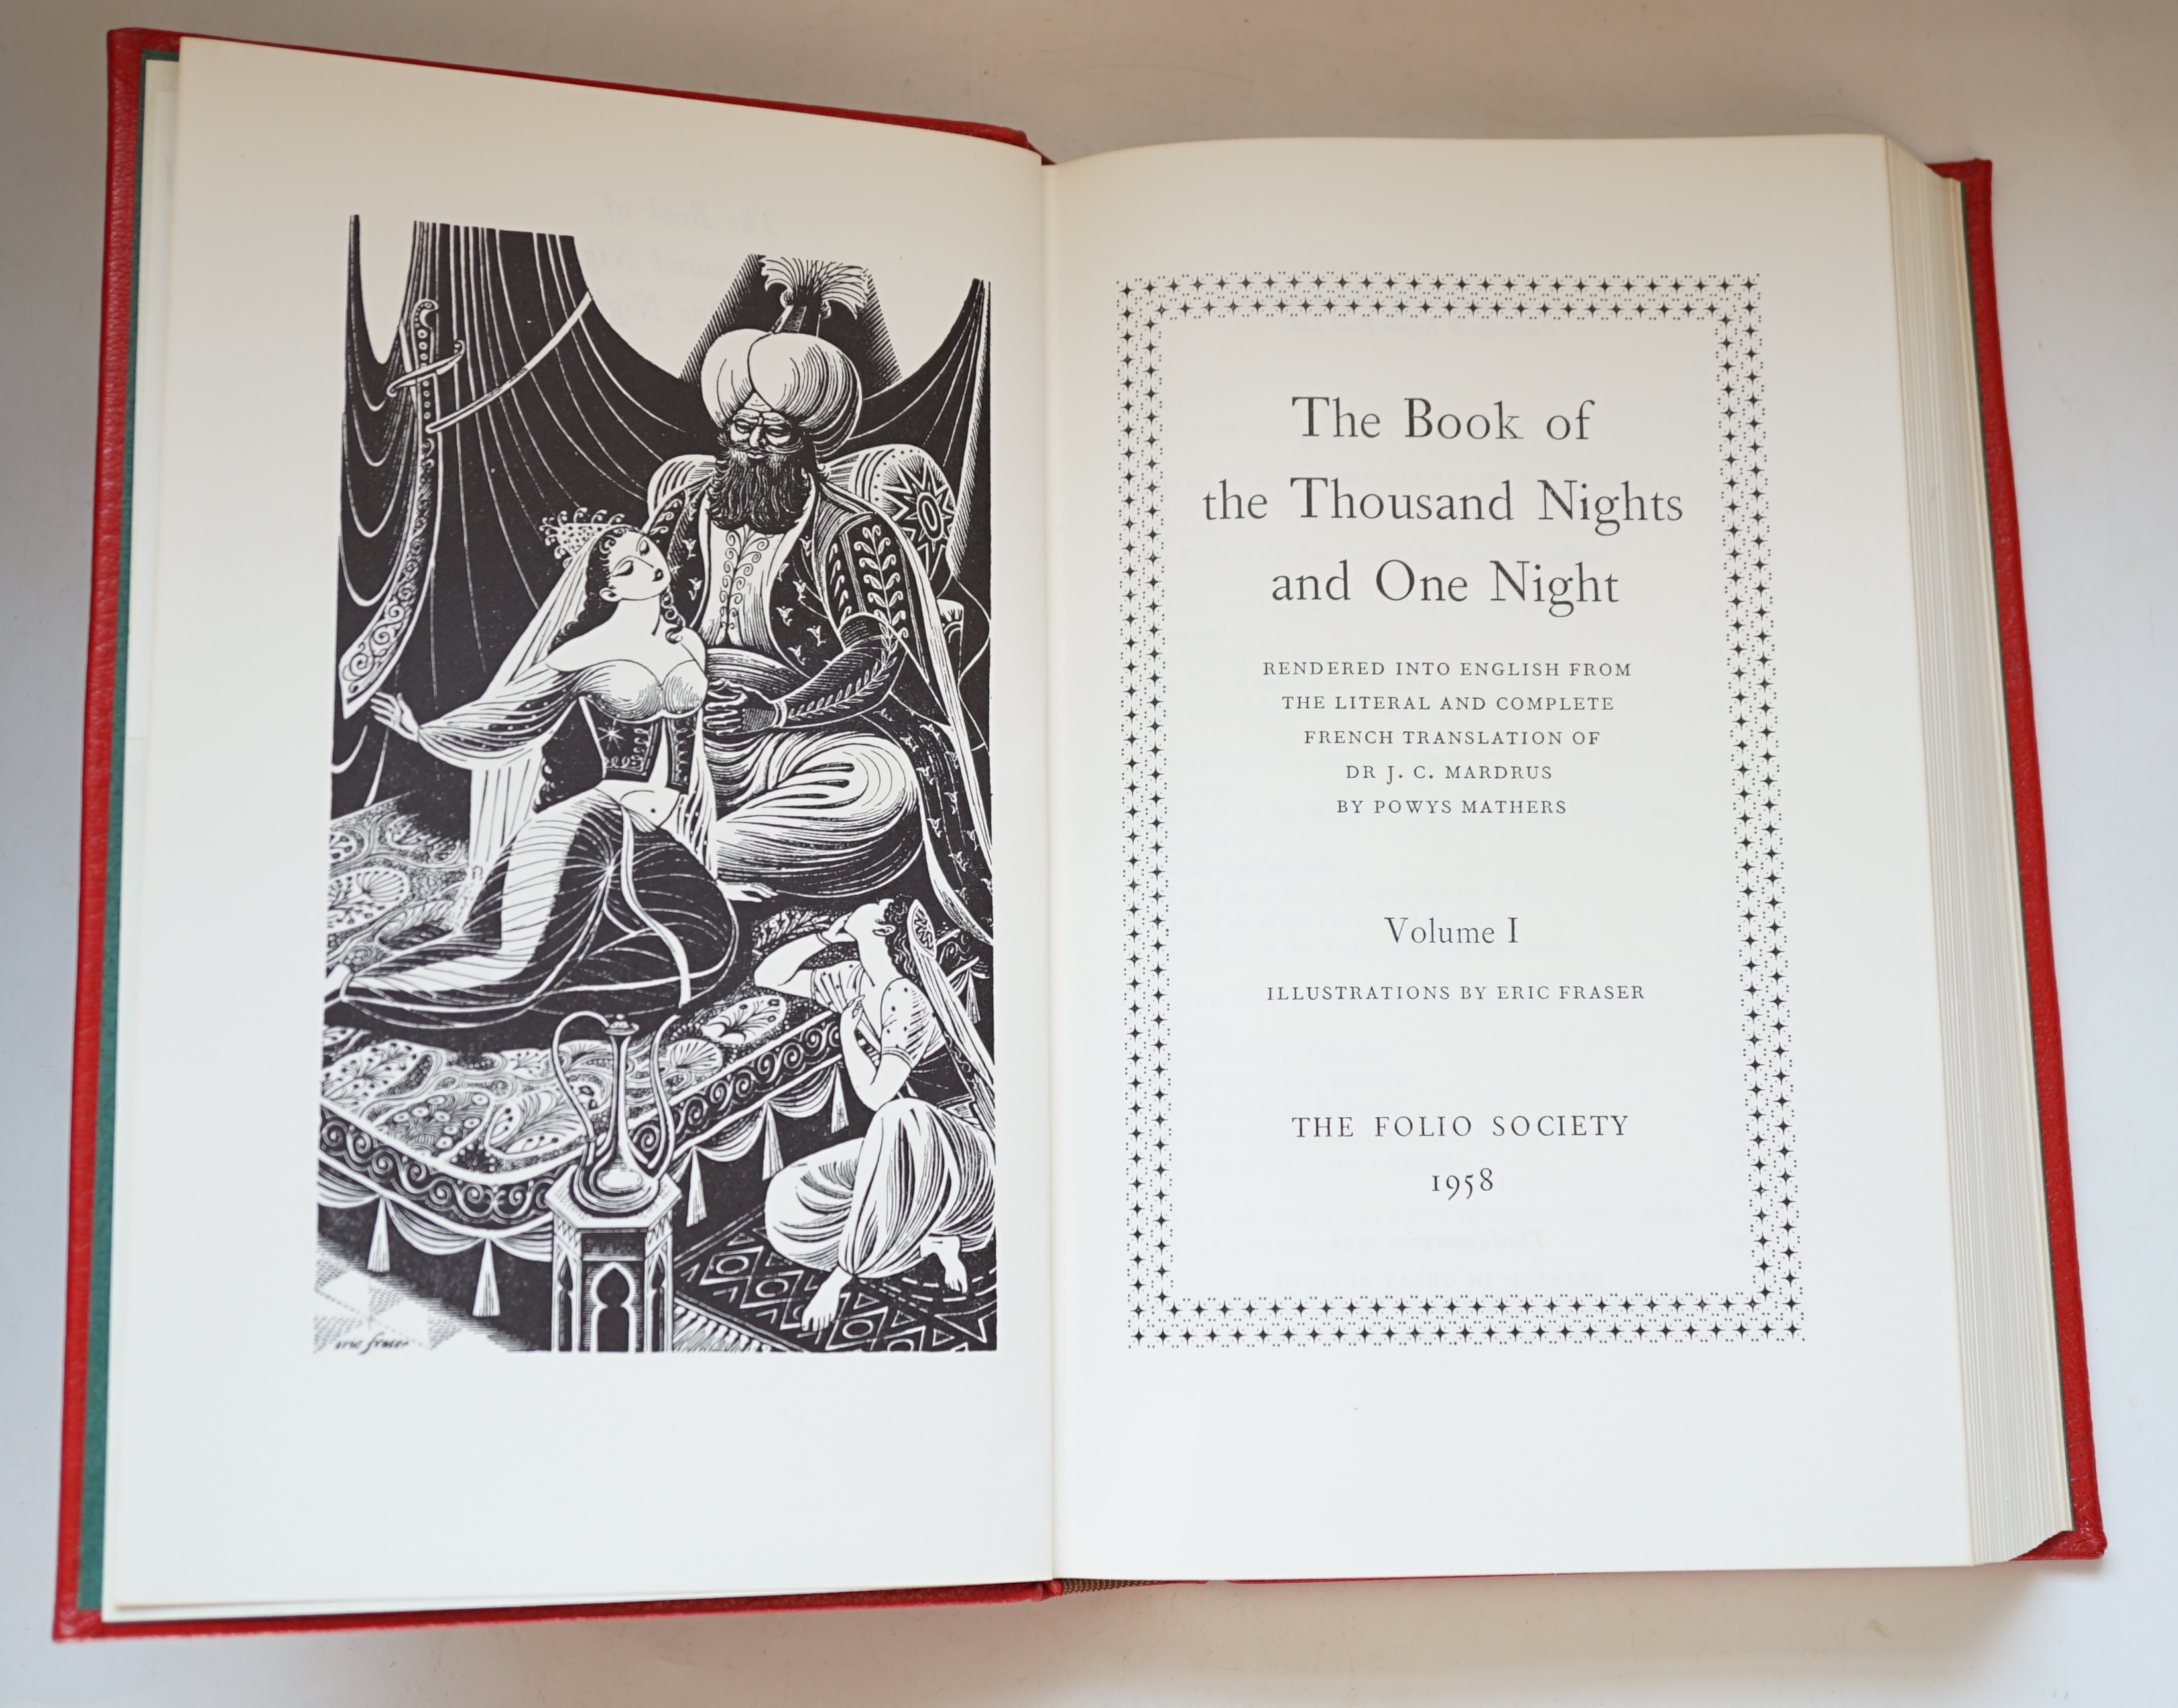 Folio Society - The Book of the Thousand Nights and One Night, rendered into English from the literal and complete French translation of Dr J. C. Mardrus by Powys Matheurs, 4 vols, 3rd impression , each with 13 illustrat